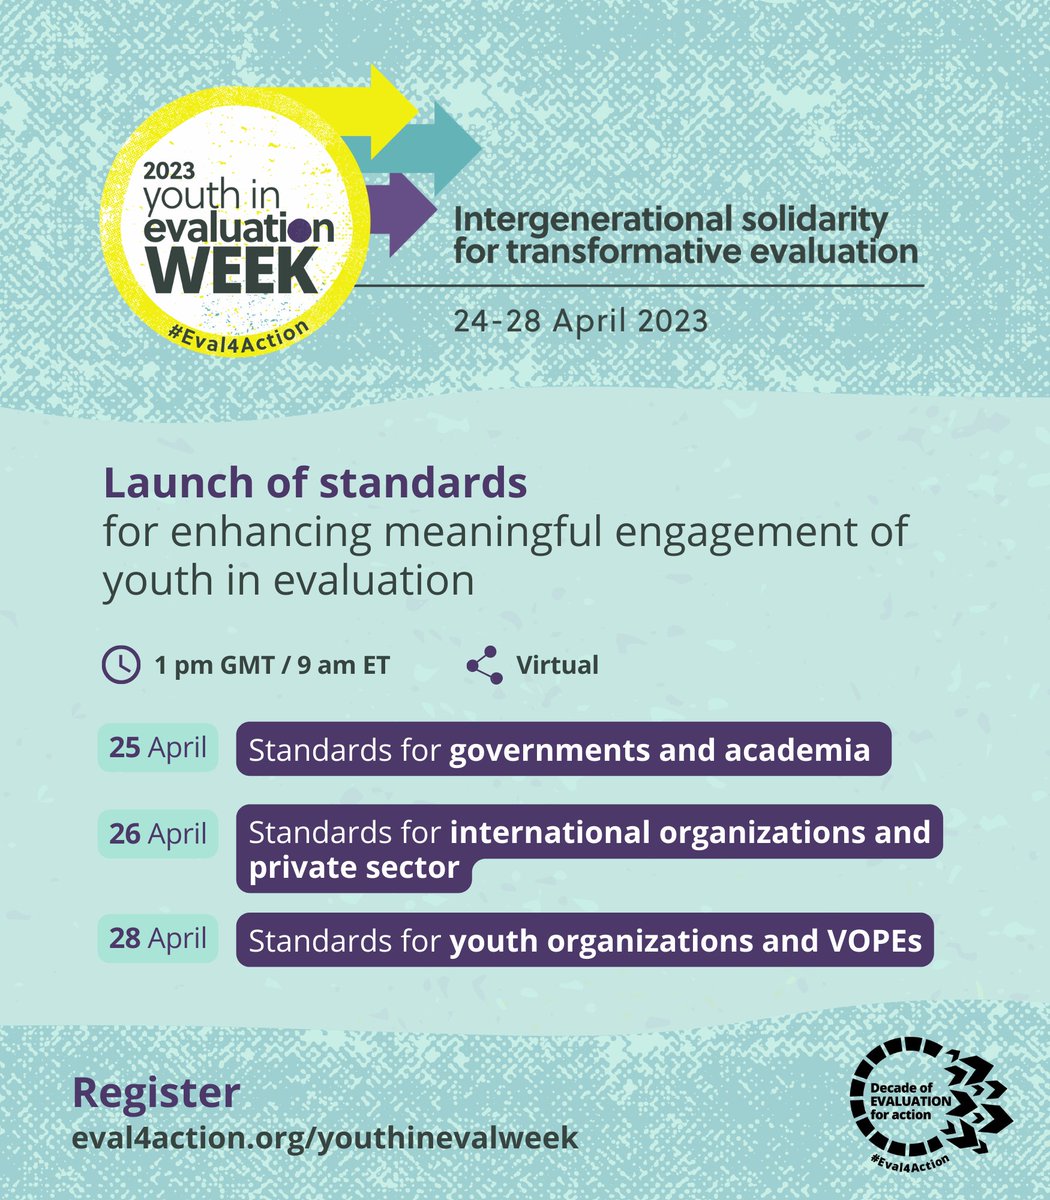 At the Youth in Evaluation week: Join the launch of standards on enhancing meaningful youth engagement in #evaluation 

Unveiling tailored standards for:
✔️Governments
✔️Academia
✔️International orgs
✔️Private sector
✔️Youth orgs
✔️VOPEs

eval4action.org/youthinevalwee…

#Eval4Action